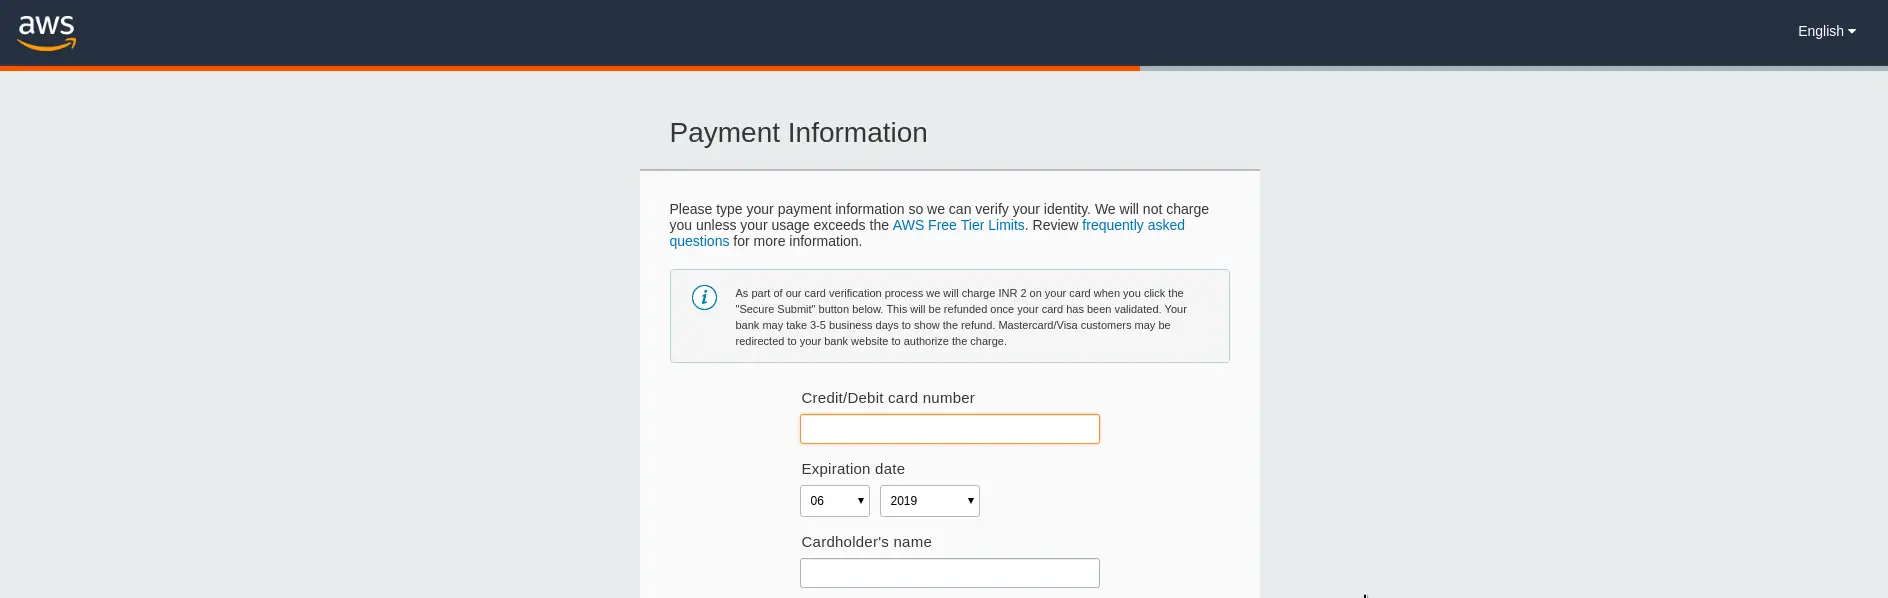 aws account credit card page